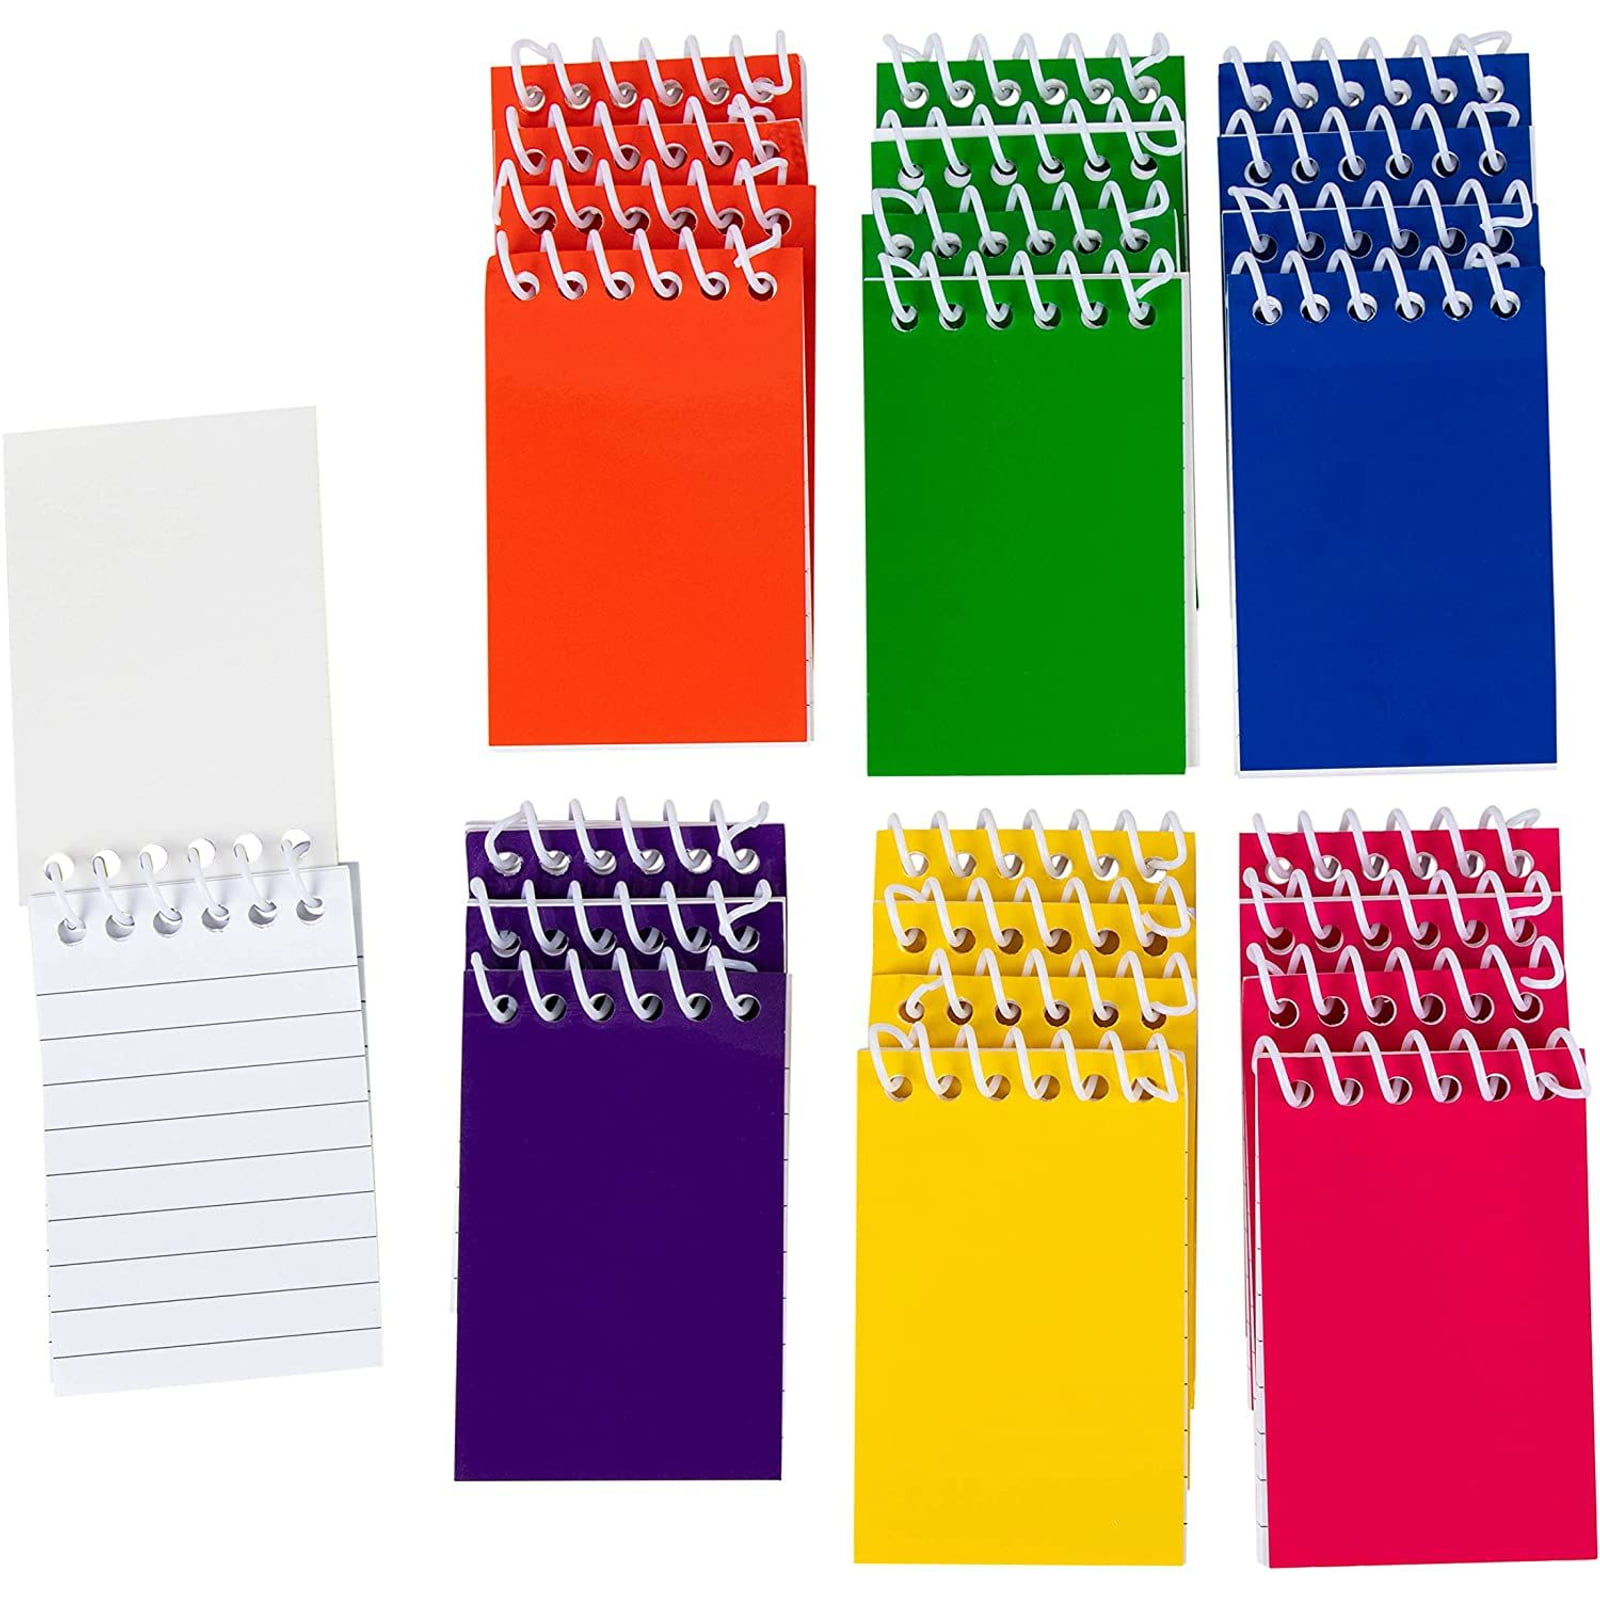 MINI NOTE BOOK SPIRAL BOUND WRITING NOTEPAD SMALL PAD RADOM GIFTS Gift 